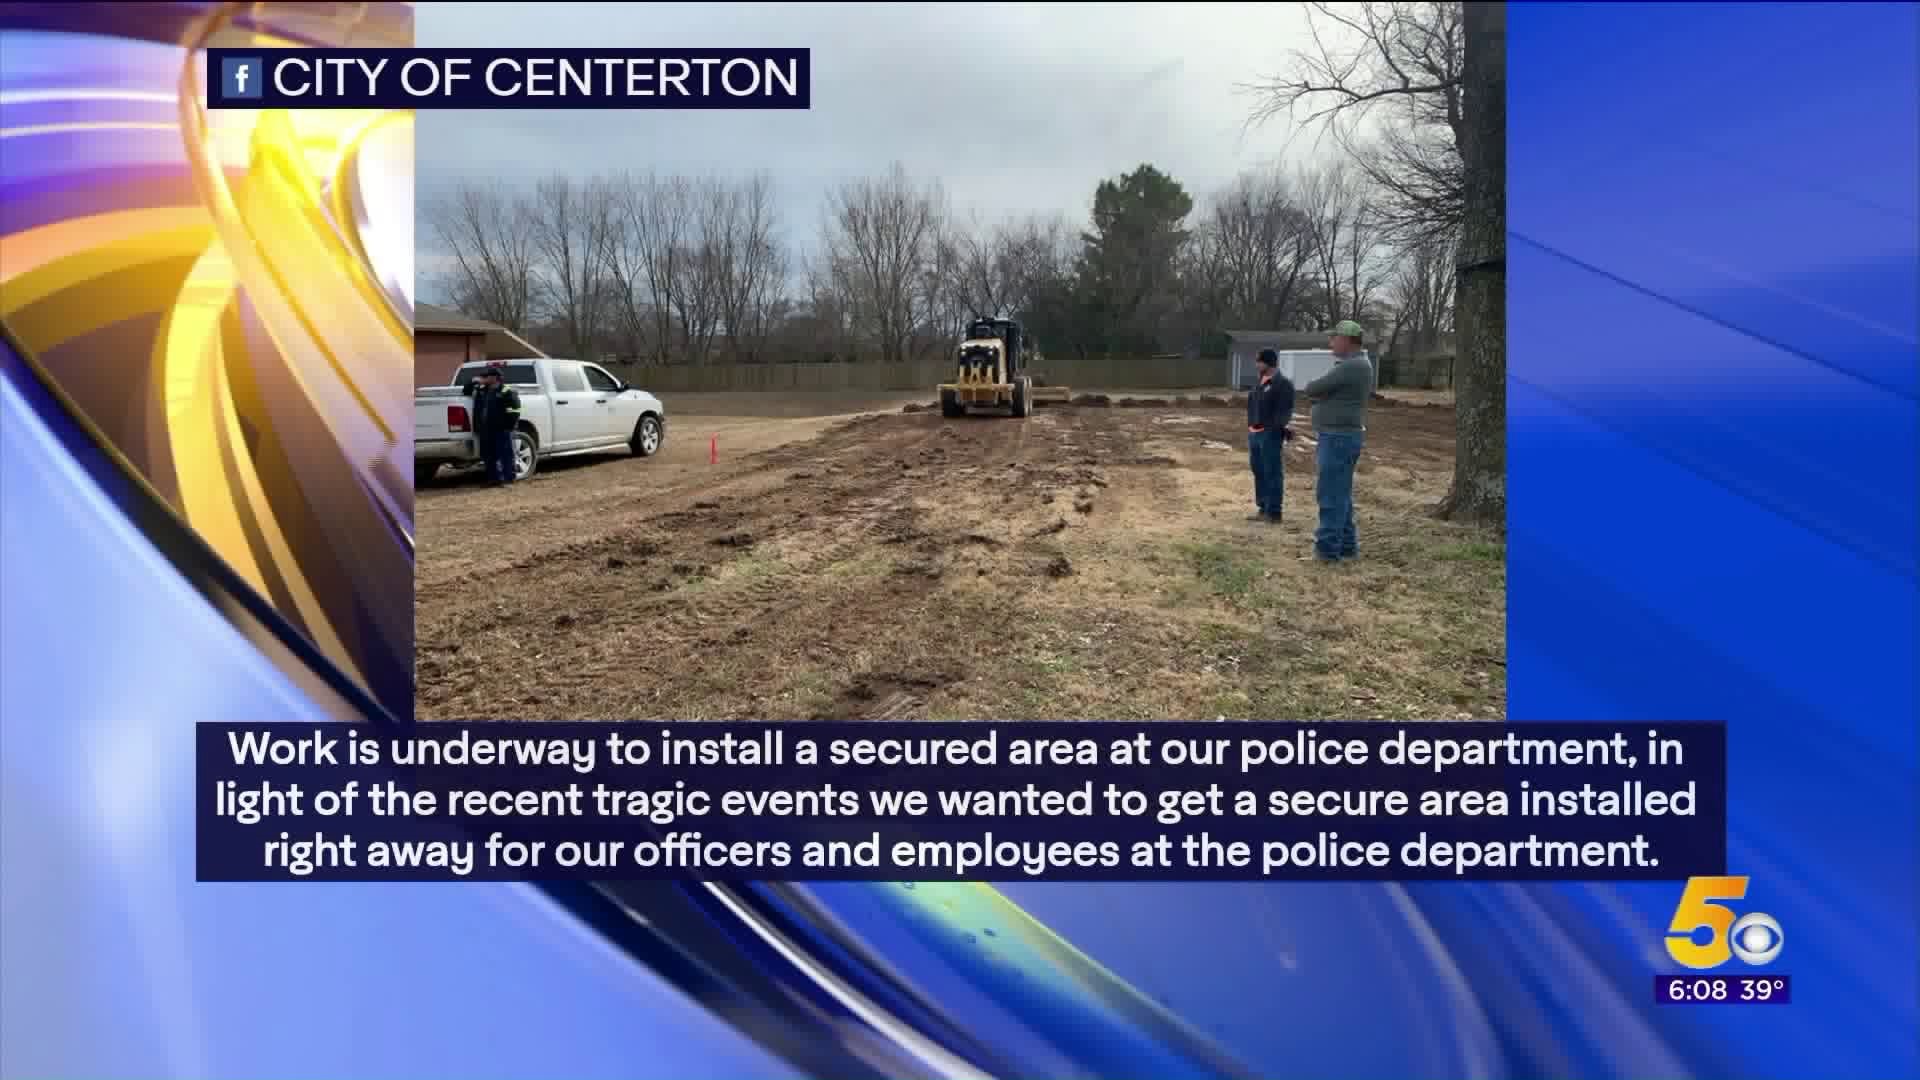 Centerton Police Department Installing Secured Area Following Recent Tragic Events